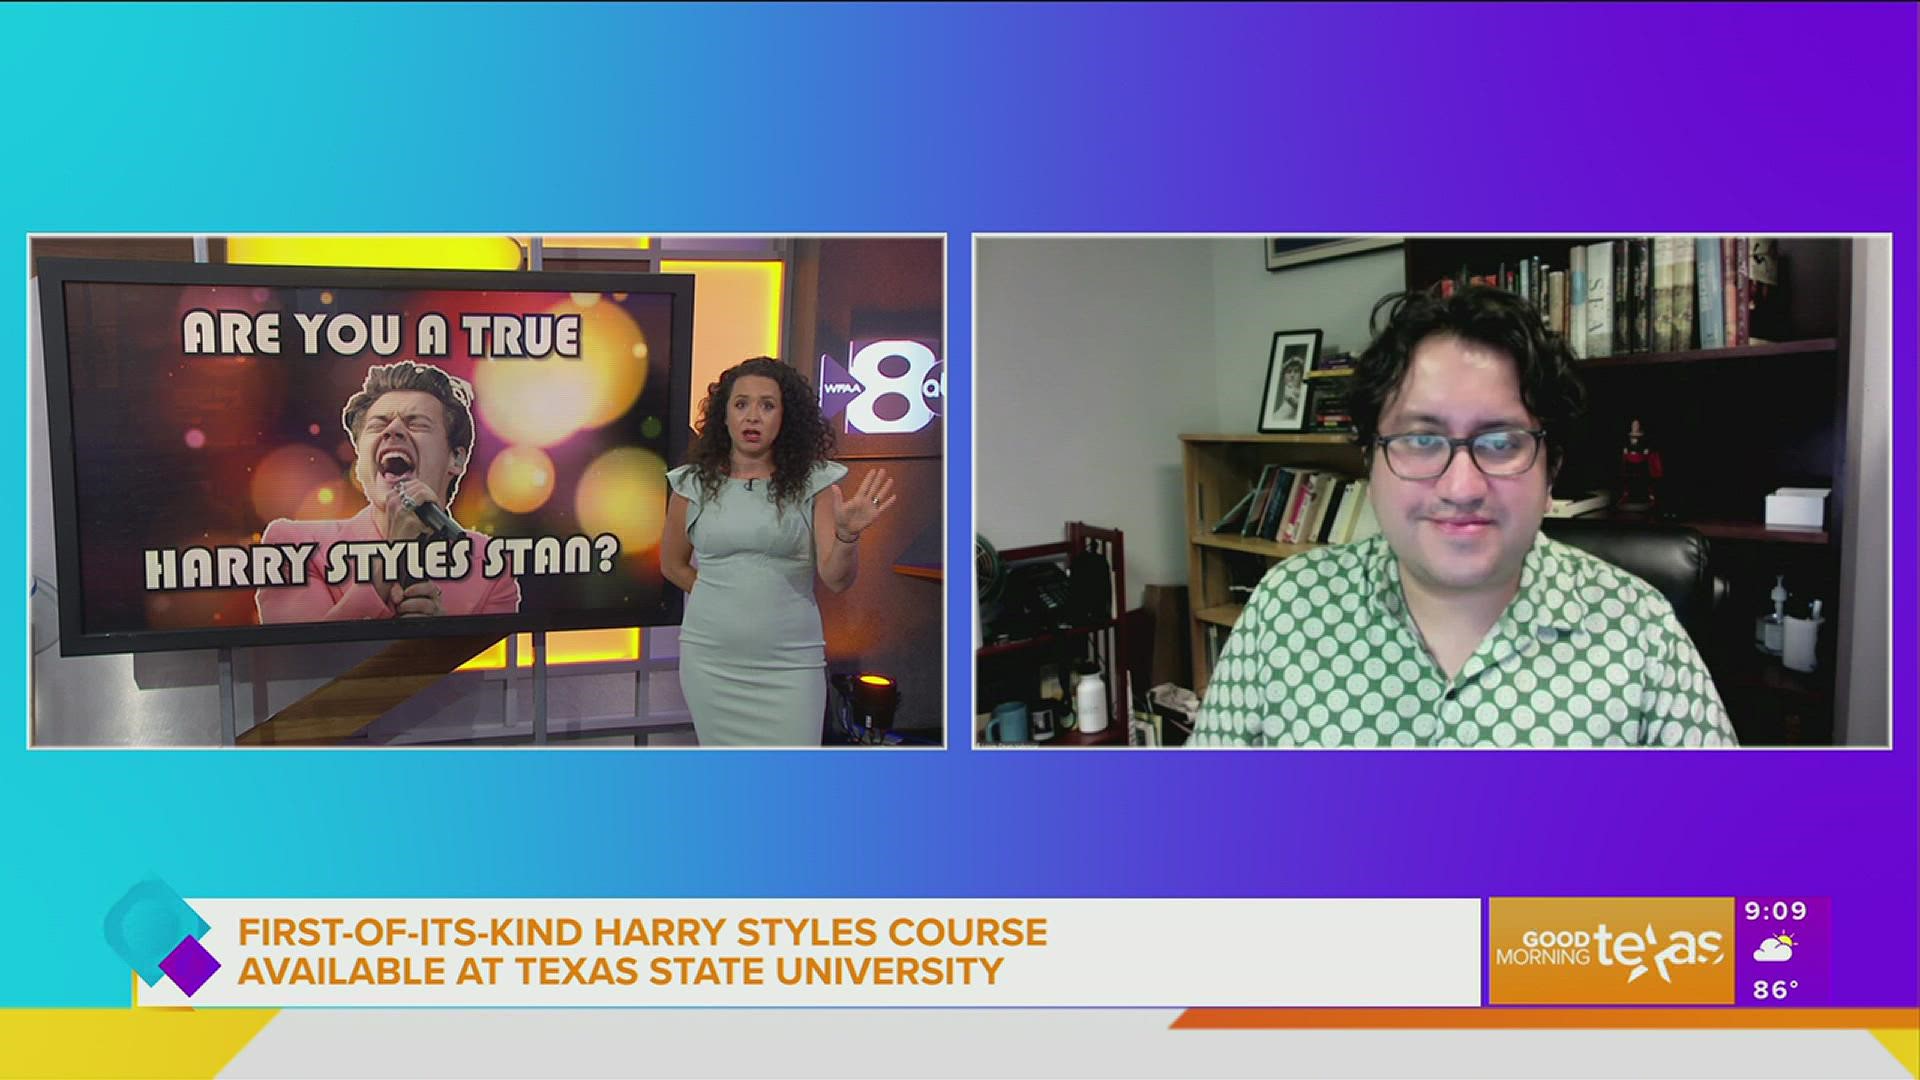 We chat with the Texas State University Professor about this first-of-its-kind Harry Styles course and even put him to the test.